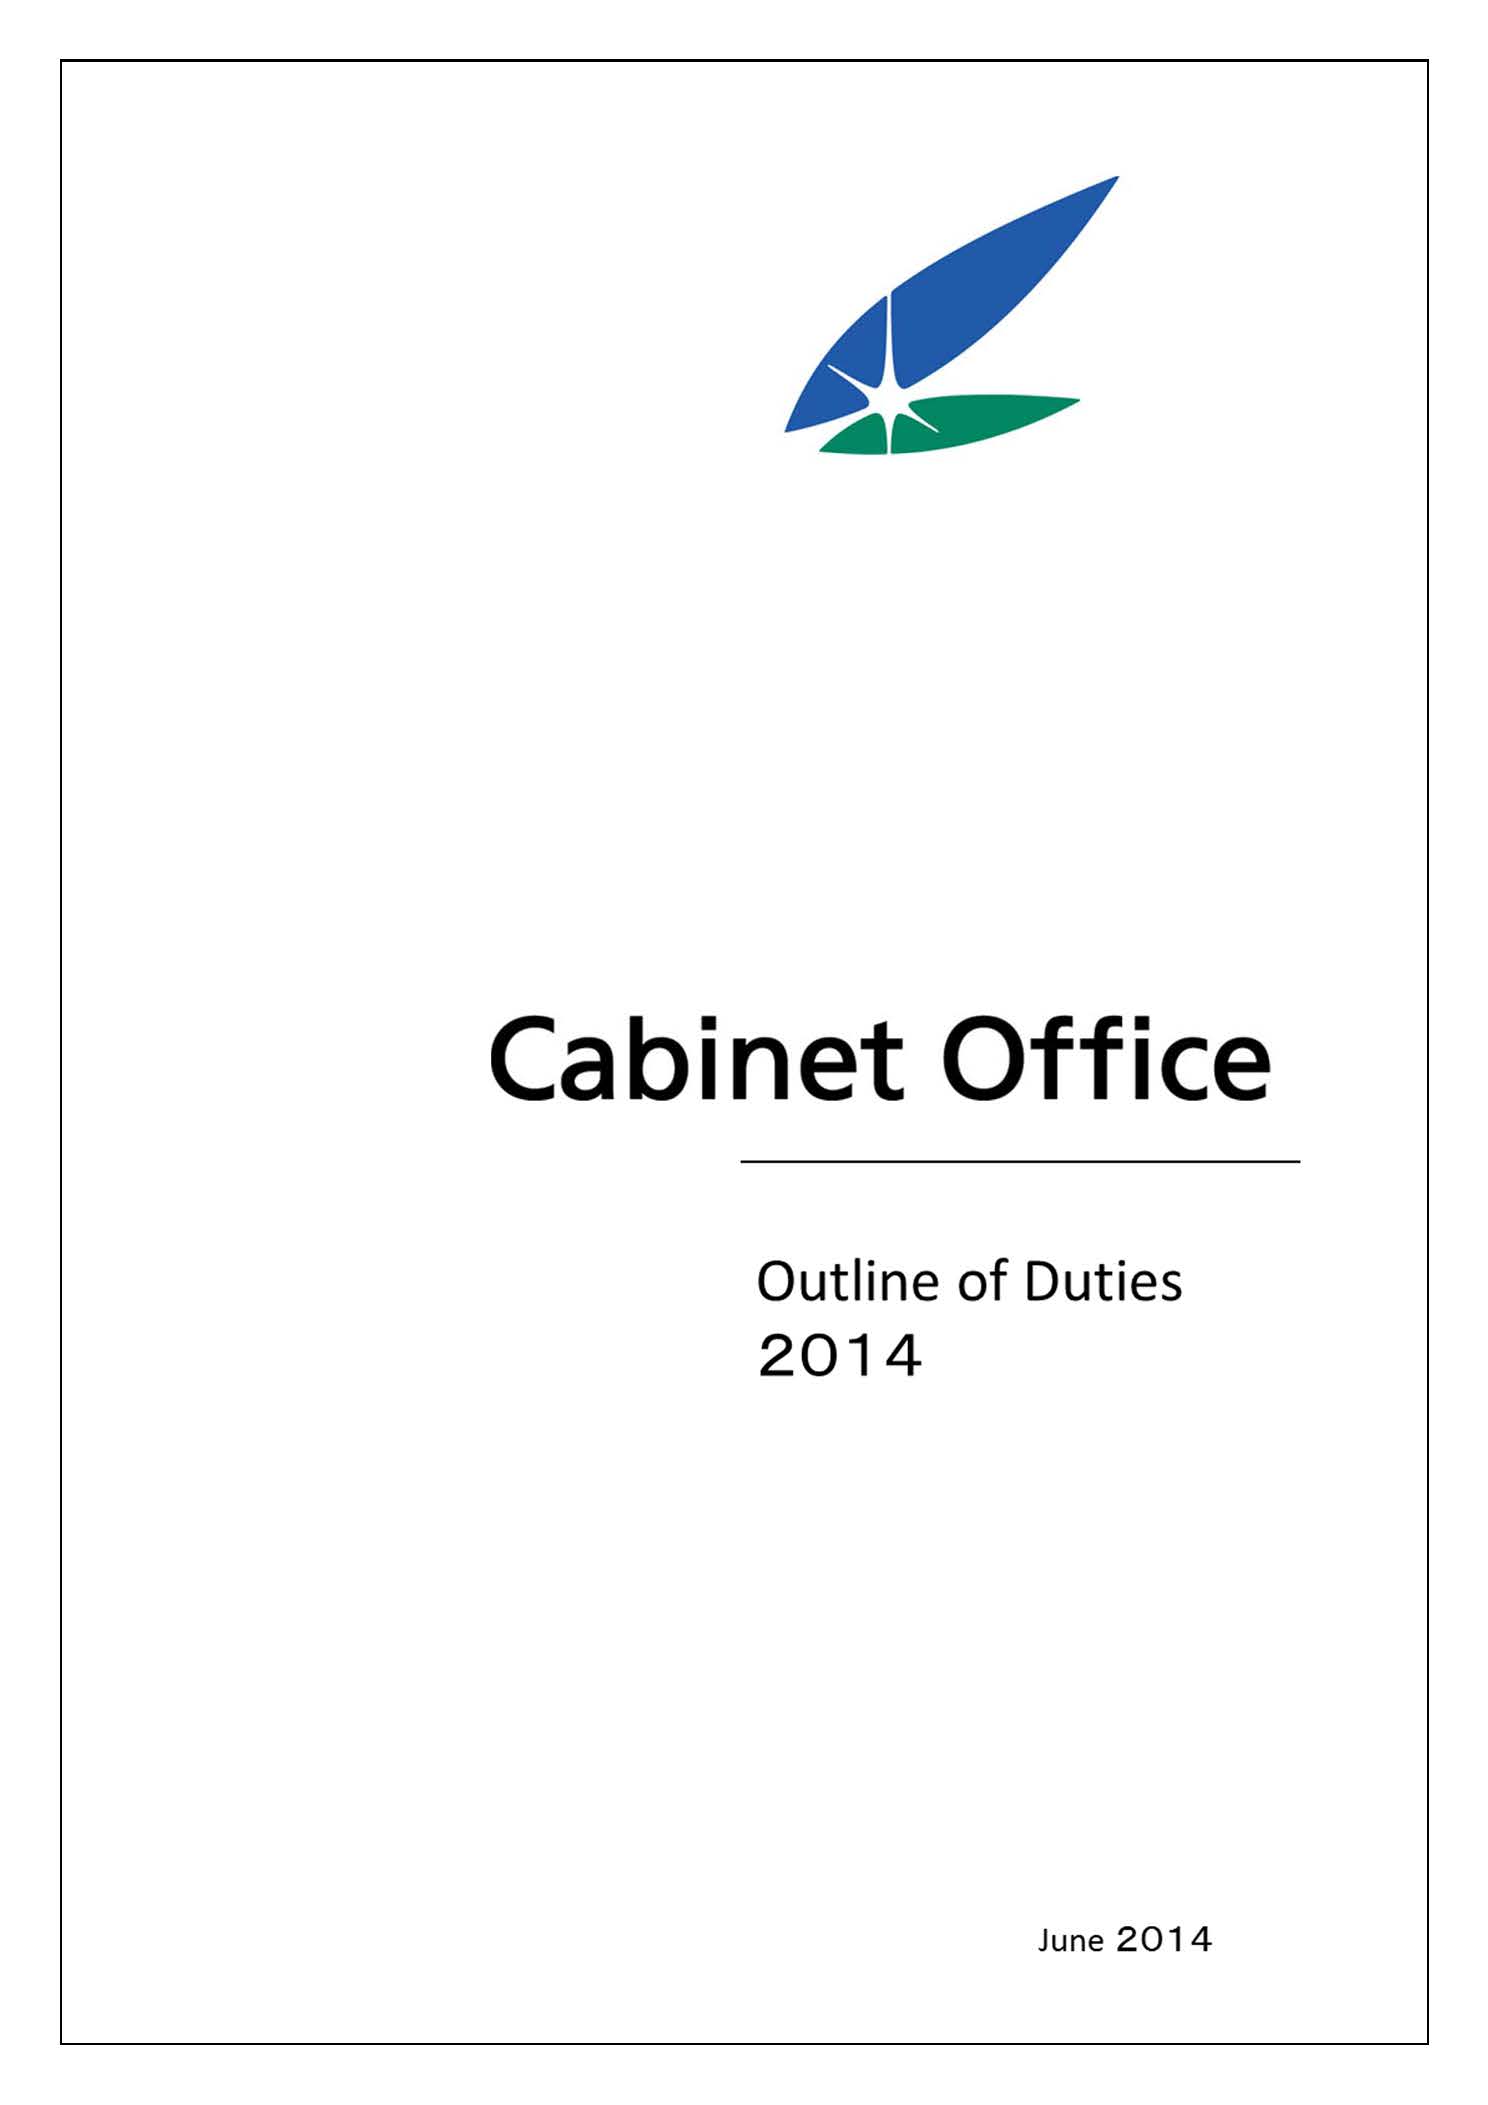 Outline Of Duties 2014 Cabinet Office Cabinet Office Home Page